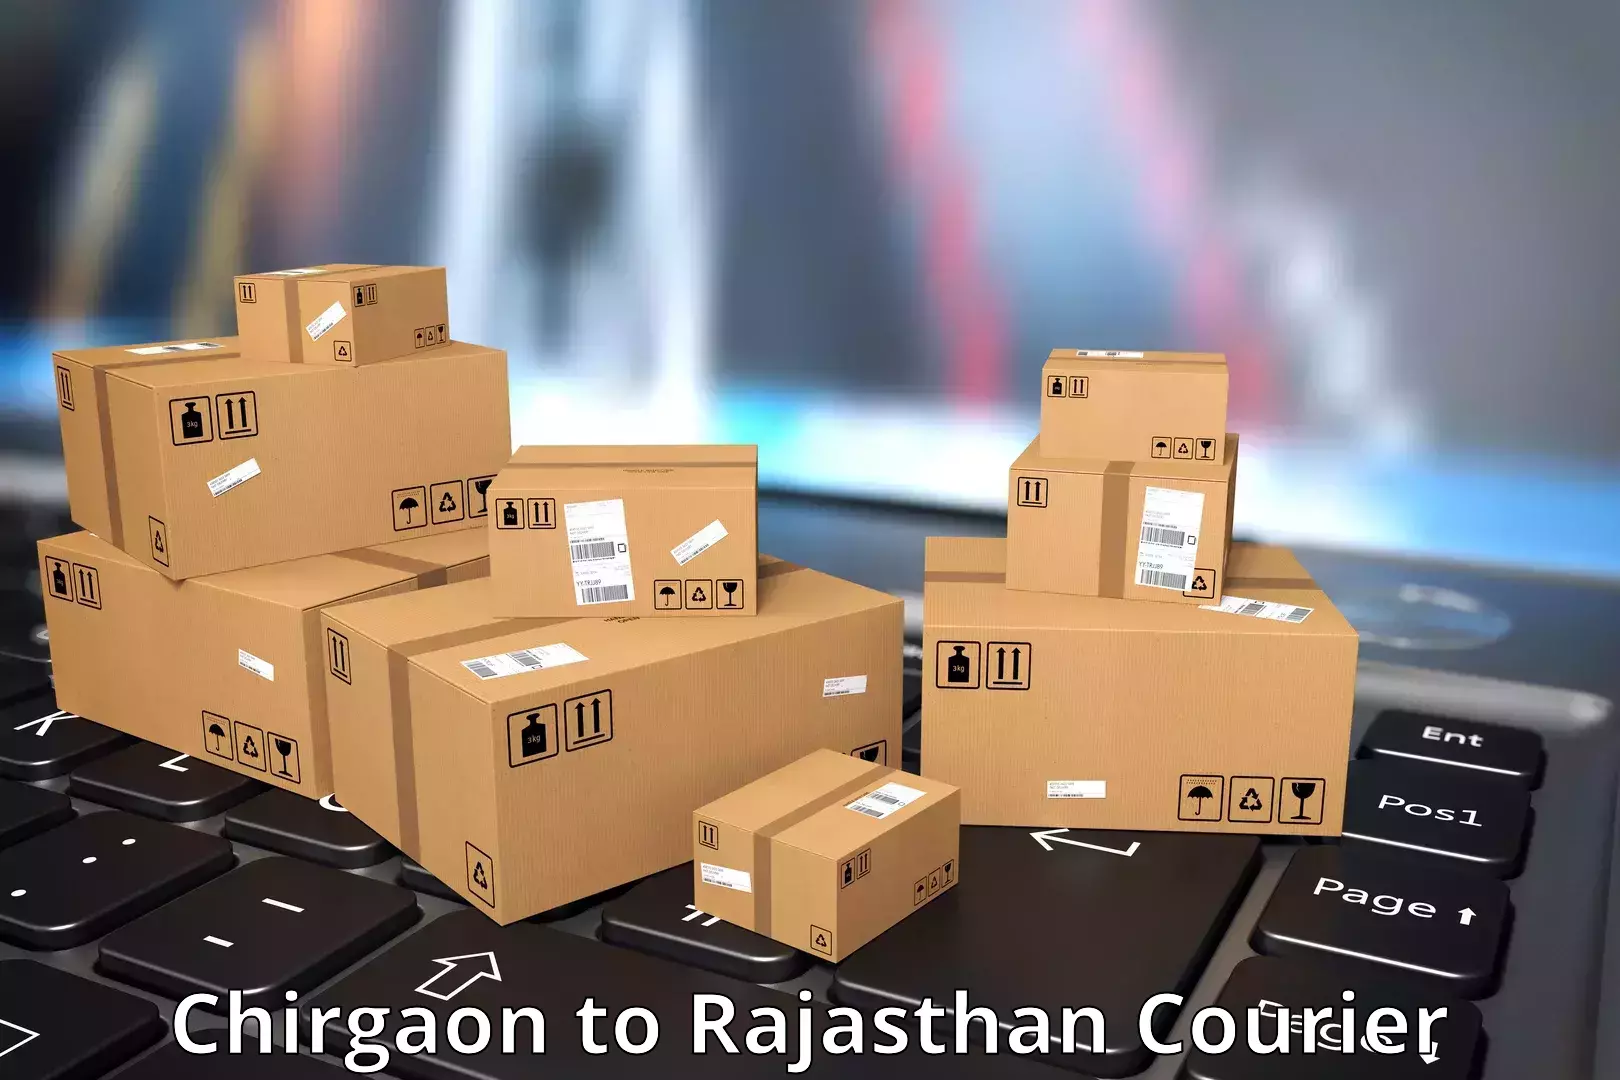 Courier service partnerships Chirgaon to Rajasthan